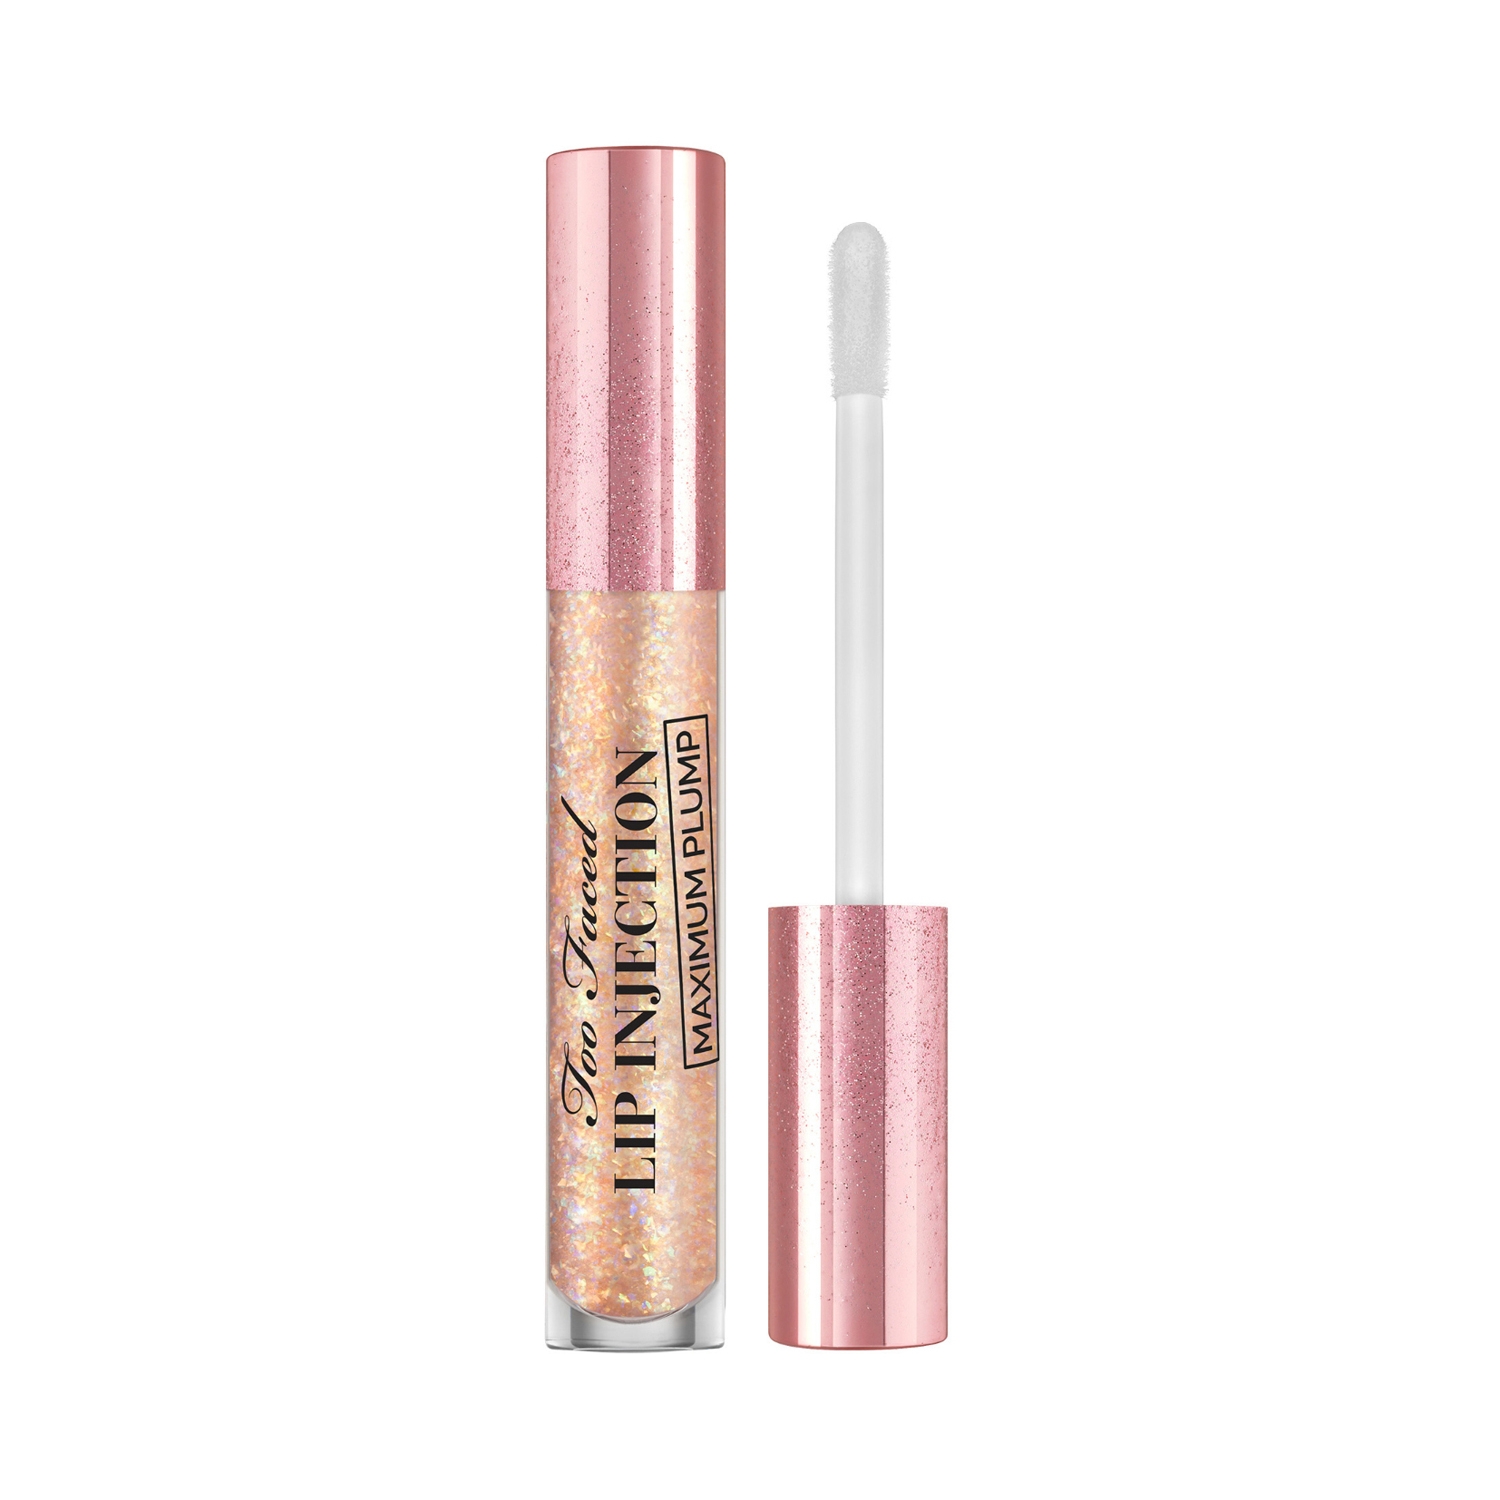 Too Faced | Too Faced Lip Injection Max Plump - Cosmic Crush (4g)